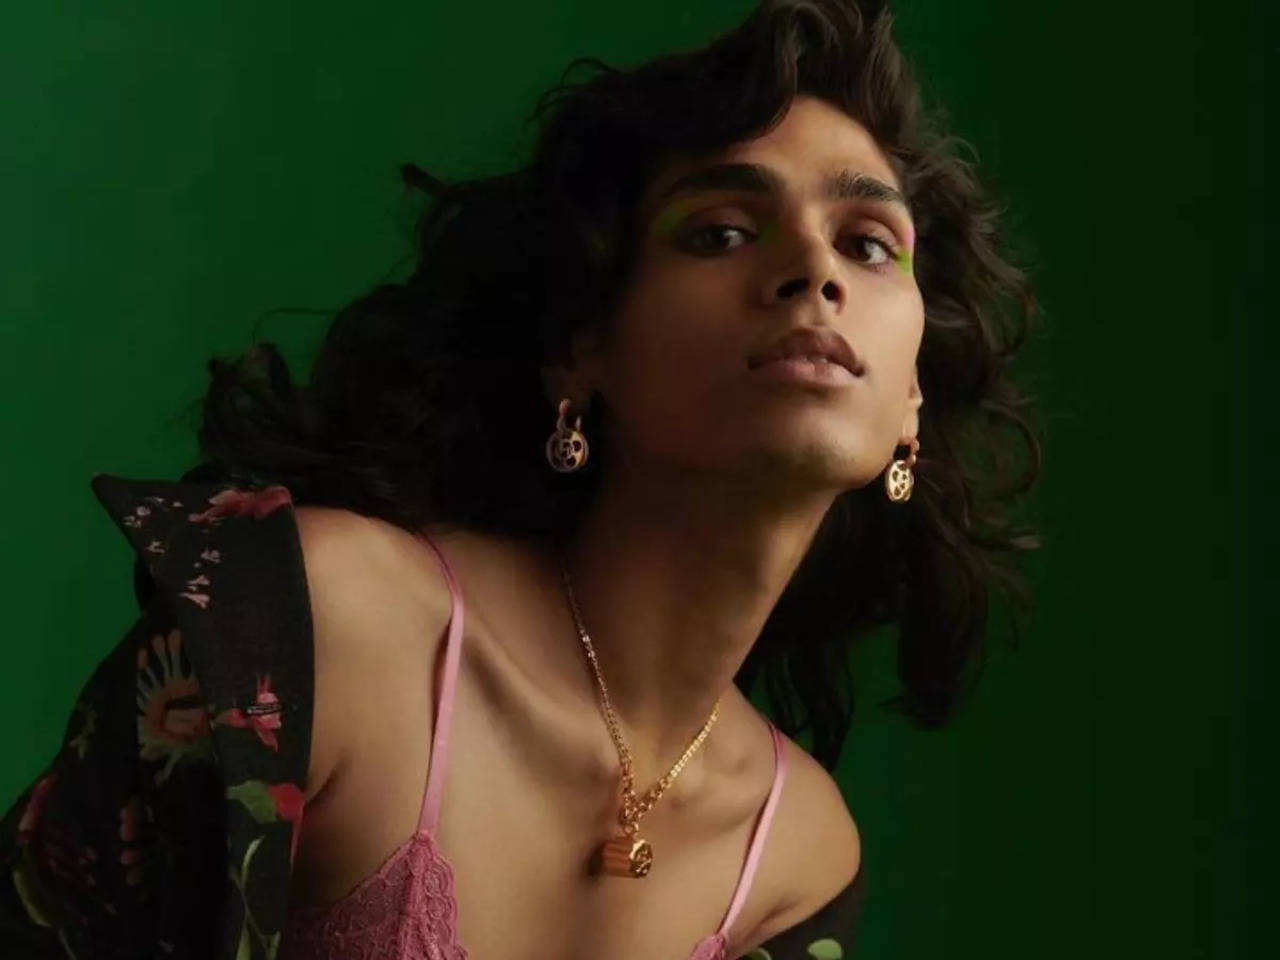 Trans-Indian model forced to remove shirt at Muscat airport, faces homophobia picture